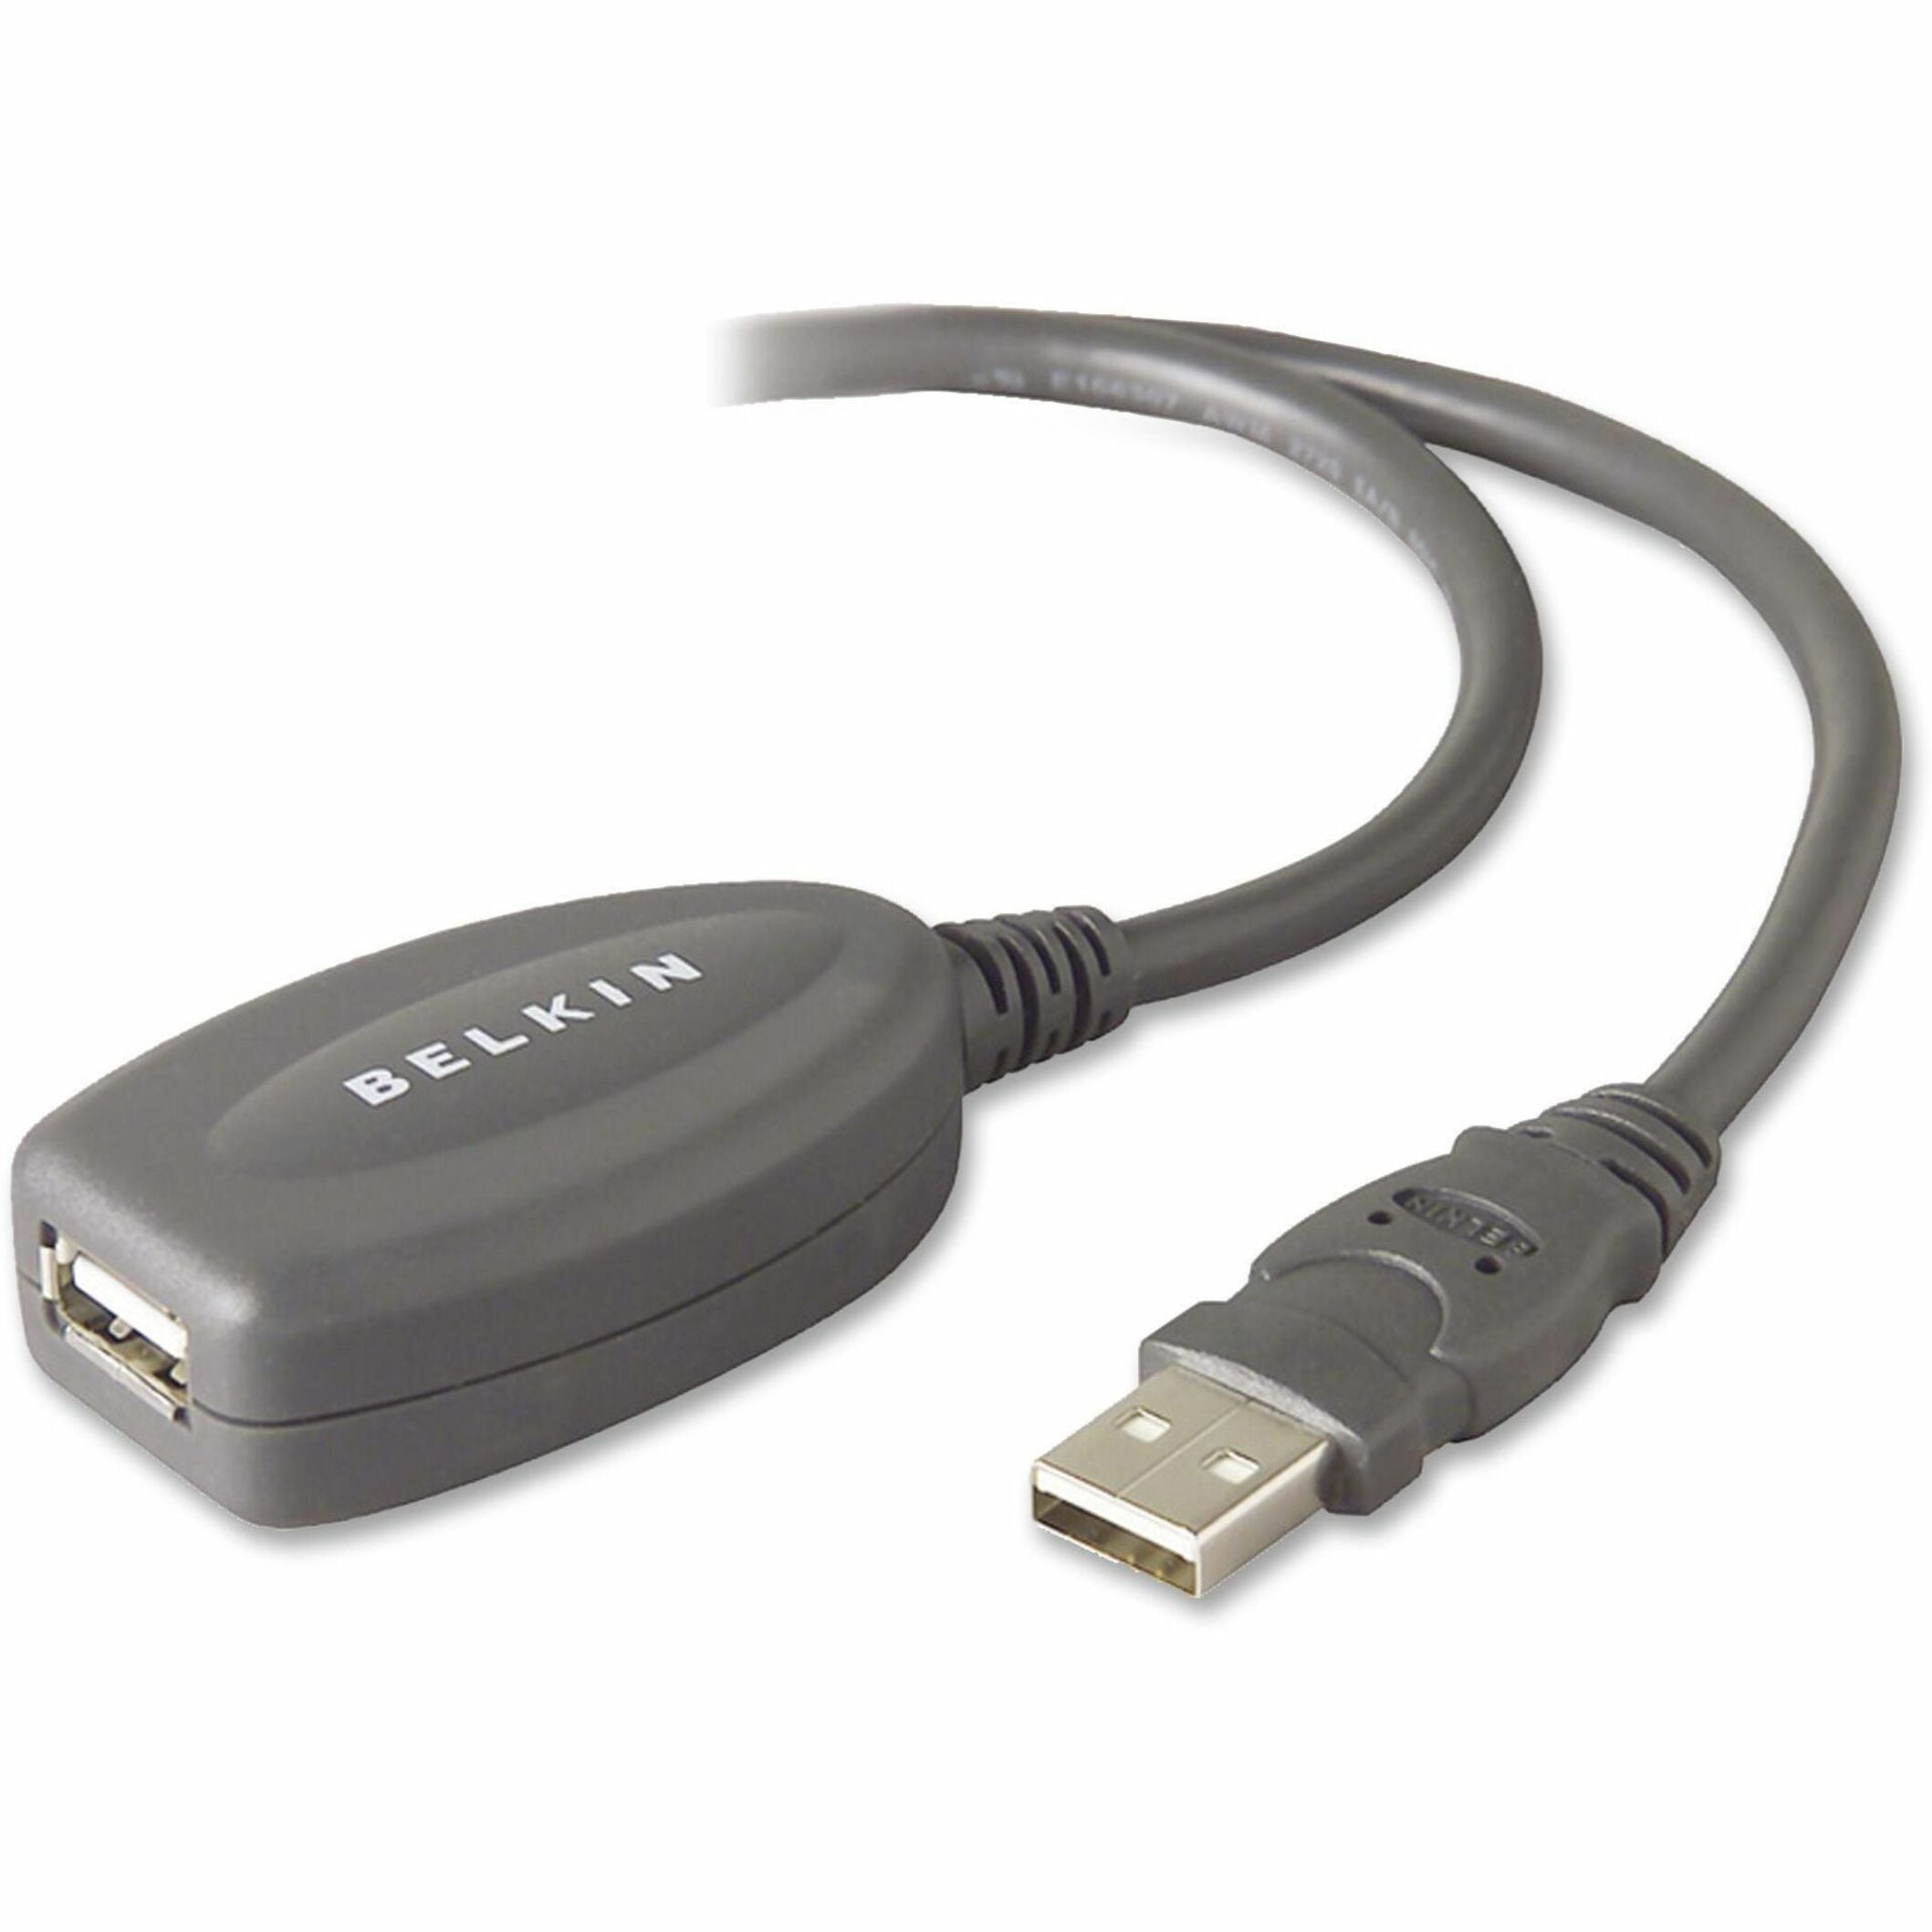 Belkin F3U130-16 16' USB Extension Cable, Connect up to 80 ft, Plug-and-Play